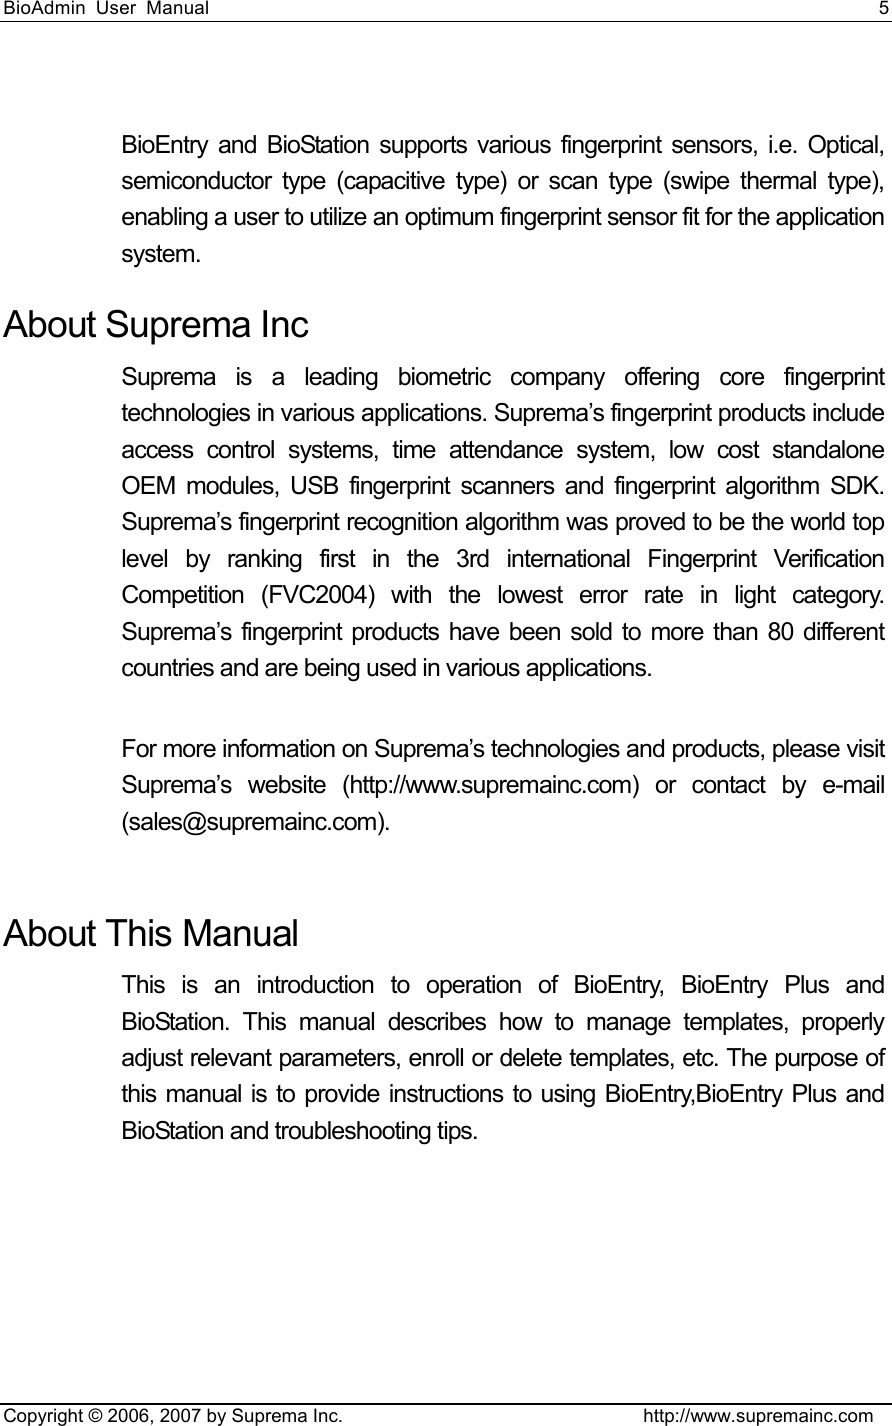 BioAdmin User Manual                                                                     5   Copyright © 2006, 2007 by Suprema Inc.                                http://www.supremainc.com  BioEntry and BioStation supports various fingerprint sensors, i.e. Optical, semiconductor type (capacitive type) or scan type (swipe thermal type), enabling a user to utilize an optimum fingerprint sensor fit for the application system.  About Suprema Inc Suprema is a leading biometric company offering core fingerprint technologies in various applications. Suprema’s fingerprint products include access control systems, time attendance system, low cost standalone OEM modules, USB fingerprint scanners and fingerprint algorithm SDK. Suprema’s fingerprint recognition algorithm was proved to be the world top level by ranking first in the 3rd international Fingerprint Verification Competition (FVC2004) with the lowest error rate in light category. Suprema’s fingerprint products have been sold to more than 80 different countries and are being used in various applications.    For more information on Suprema’s technologies and products, please visit Suprema’s website (http://www.supremainc.com) or contact by e-mail (sales@supremainc.com).  About This Manual This is an introduction to operation of BioEntry, BioEntry Plus and BioStation. This manual describes how to manage templates, properly adjust relevant parameters, enroll or delete templates, etc. The purpose of this manual is to provide instructions to using BioEntry,BioEntry Plus and BioStation and troubleshooting tips.  